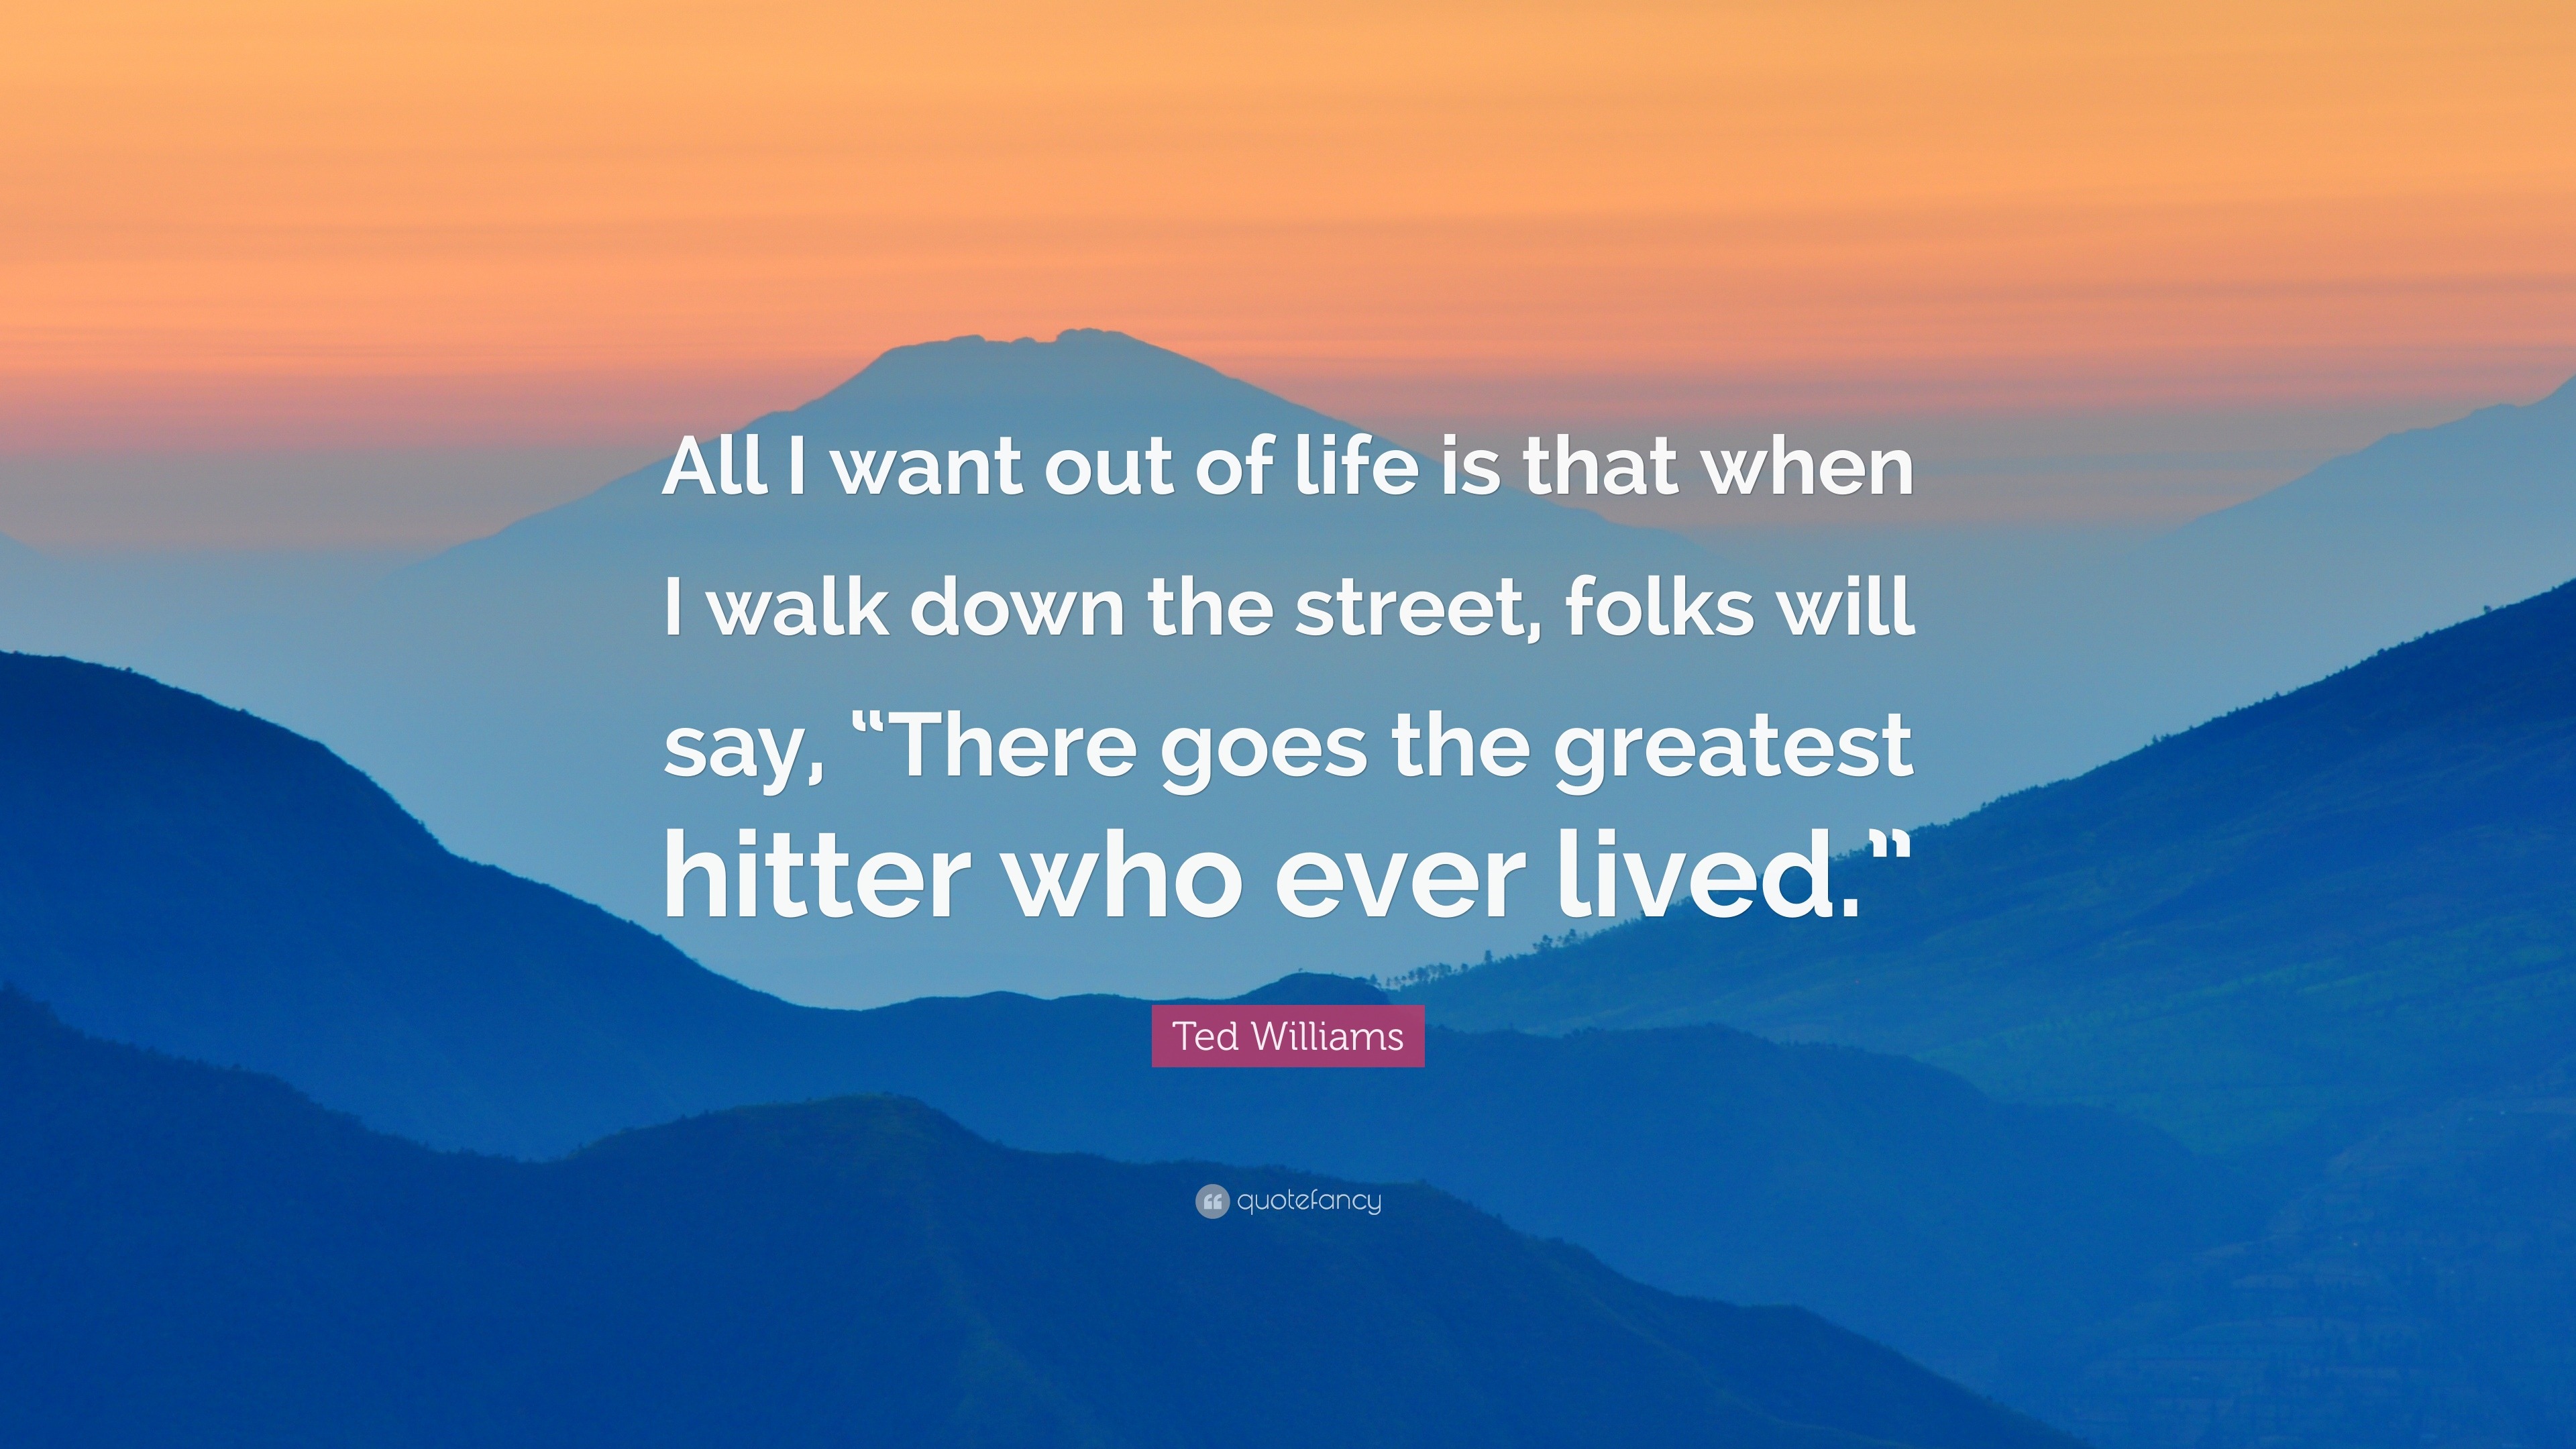 Ted Williams Quote “All I want out of life is that when I walk